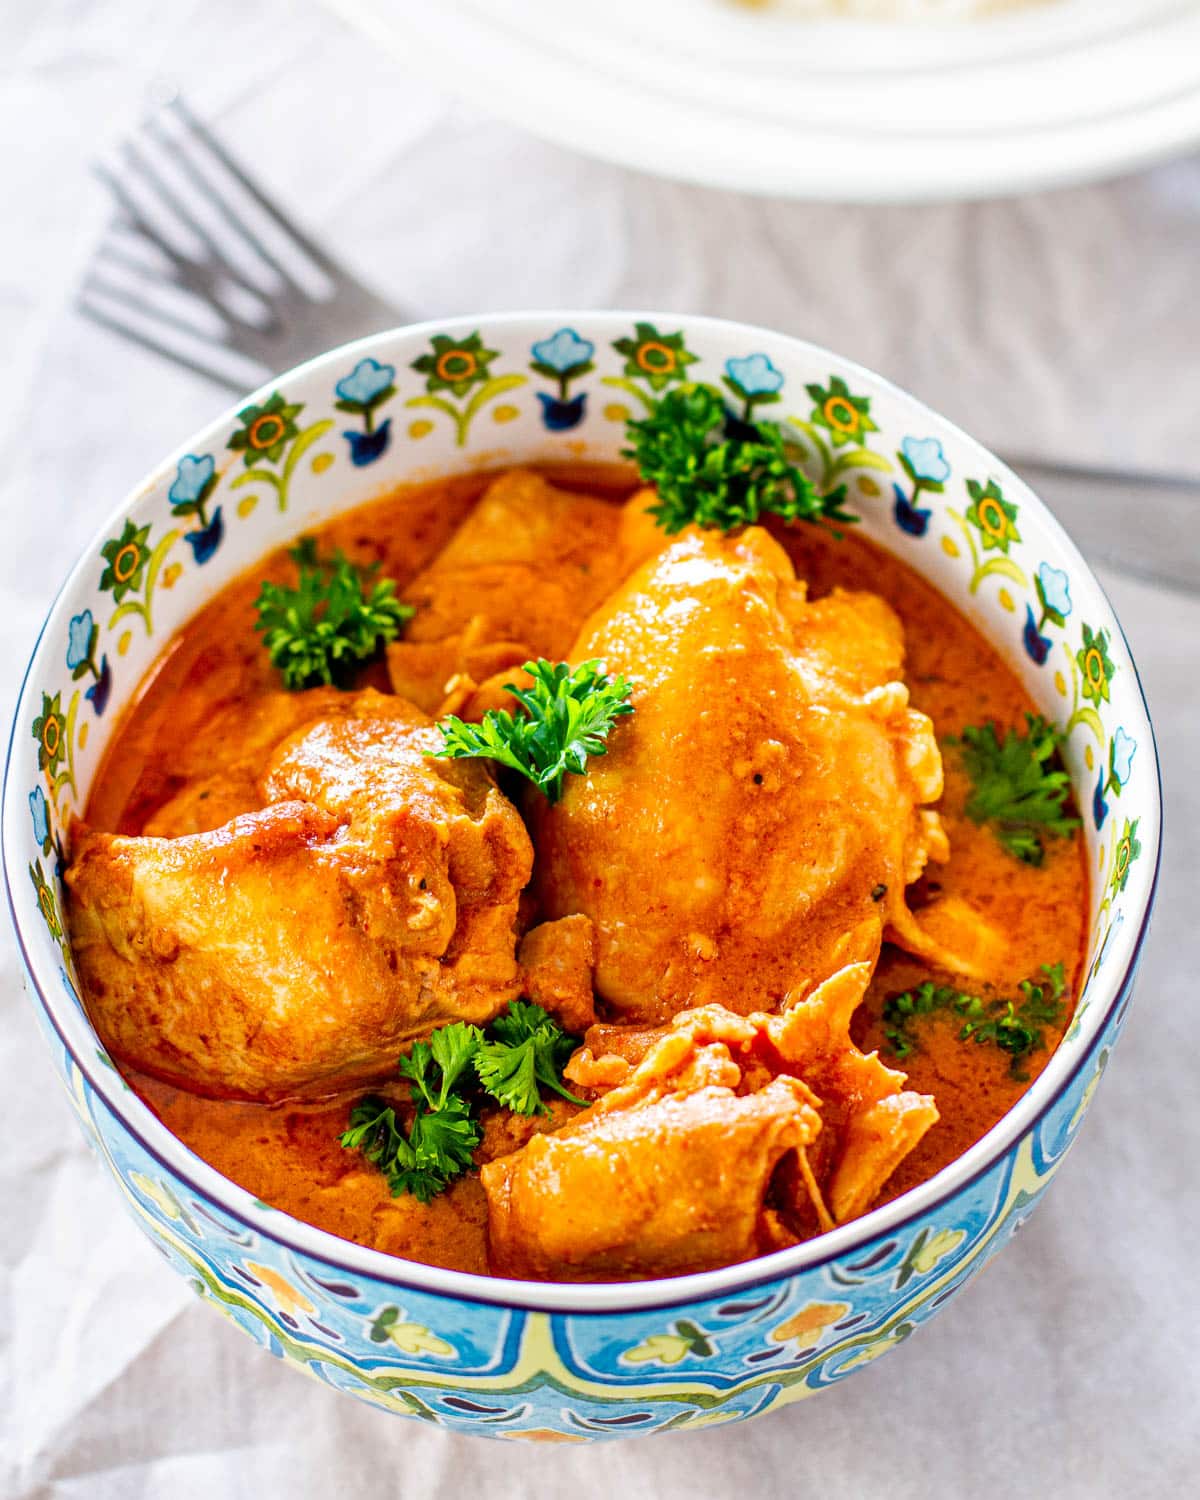 Crockpot Thai Chicken in a big blue and white bowl garnished with parsley